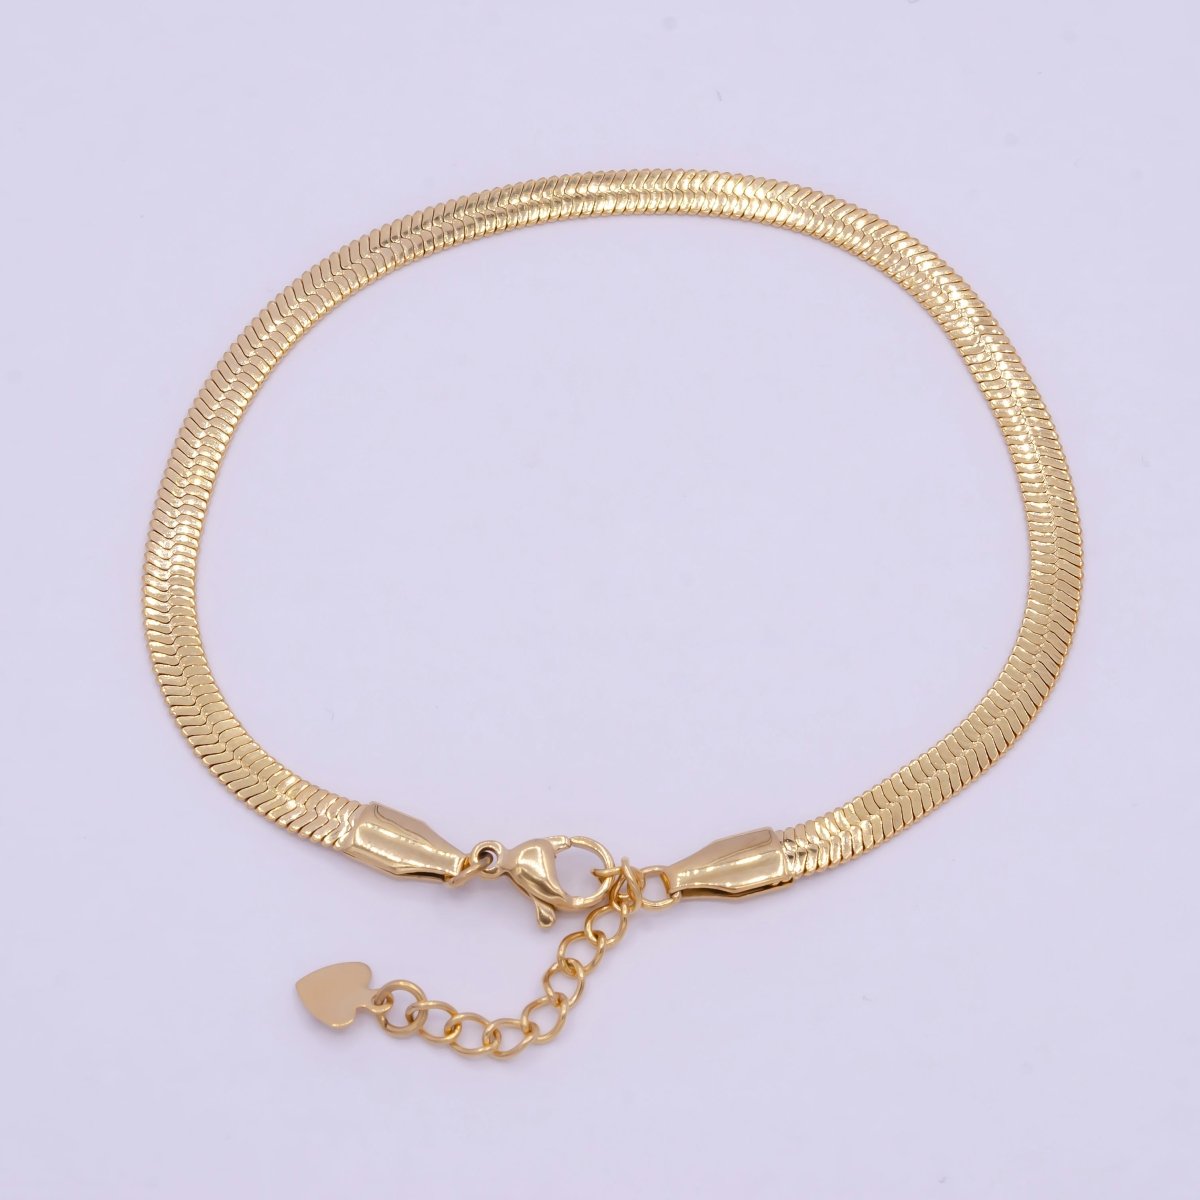 Clearance Pricing BLOWOUT Gold 4mm Herringbone Snake Chain 7 Inch Bracelet For Wholesale Bracelet Jewelry Making Supply WA-929 - DLUXCA